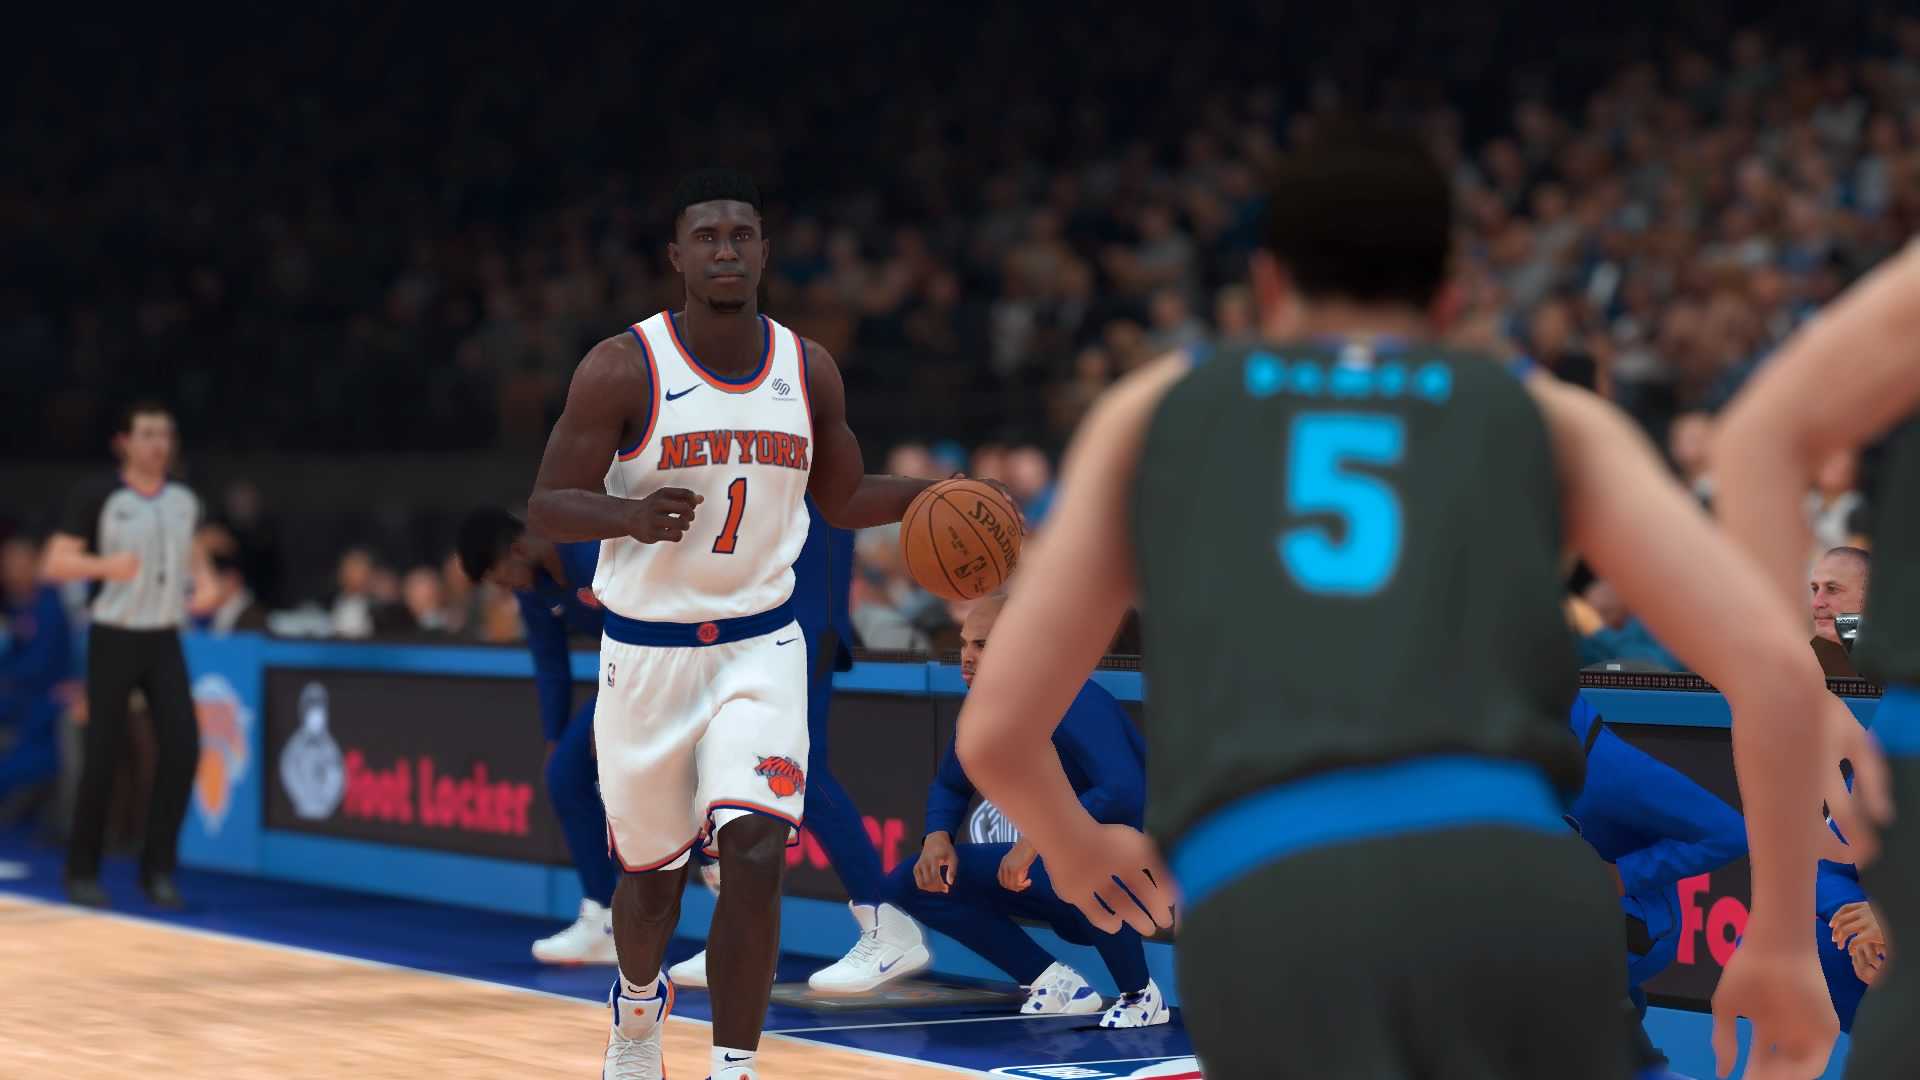  What If? Featuring Zion Williamson Powered by NBA2K19